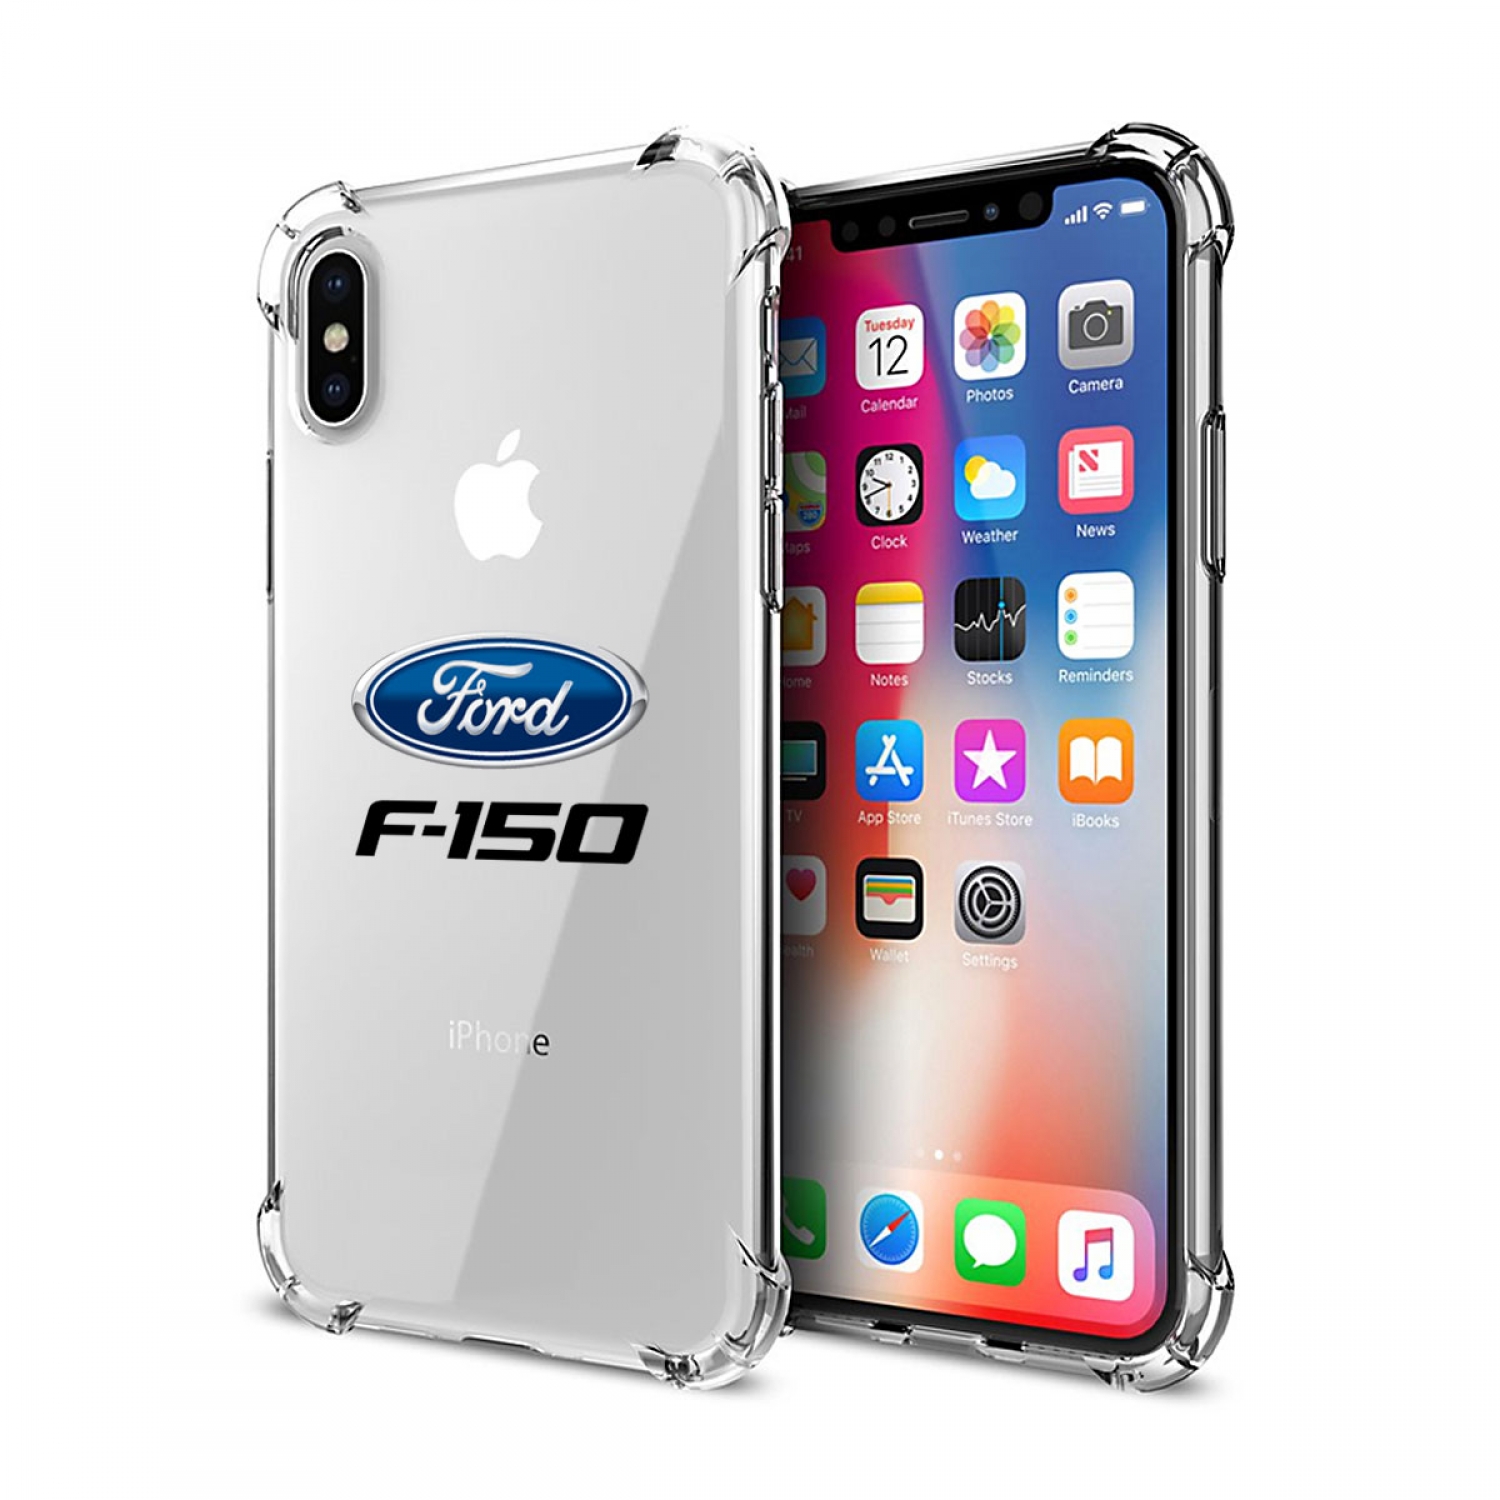 Ford F-150 iPhone X Clear TPU Shockproof Cell Phone Case